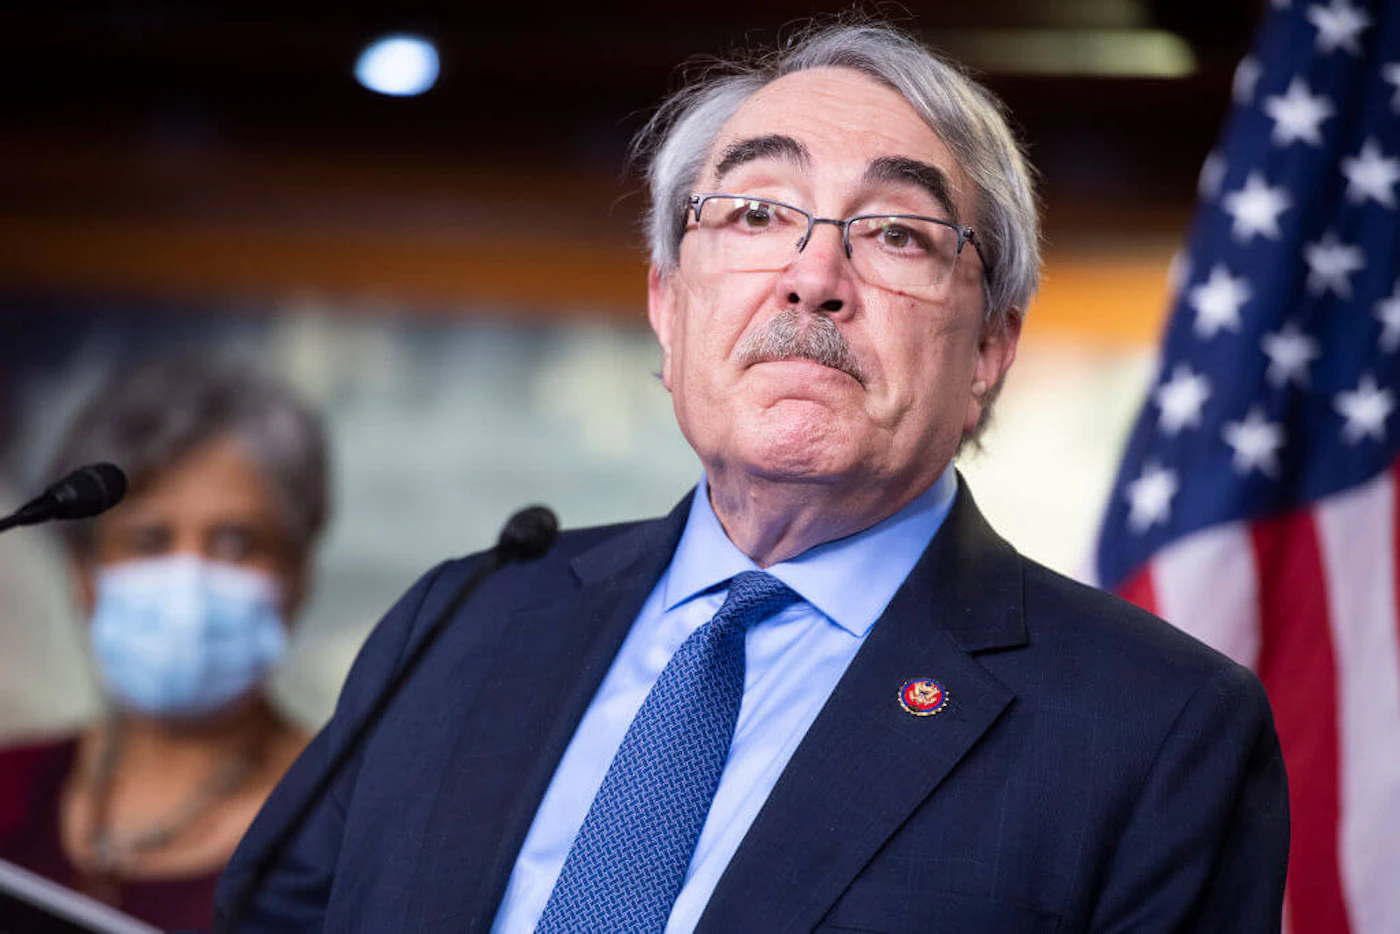 US Rep. G.K. Butterfield of North Carolina at a  Congressional Black Caucus event in April 2021. Butterfield's office is touting a Biden administration expansion of the child tax credit that they hope will lift 137,000 North Carolina children out of poverty. (Photo By Tom Williams/CQ-Roll Call, Inc via Getty Images)